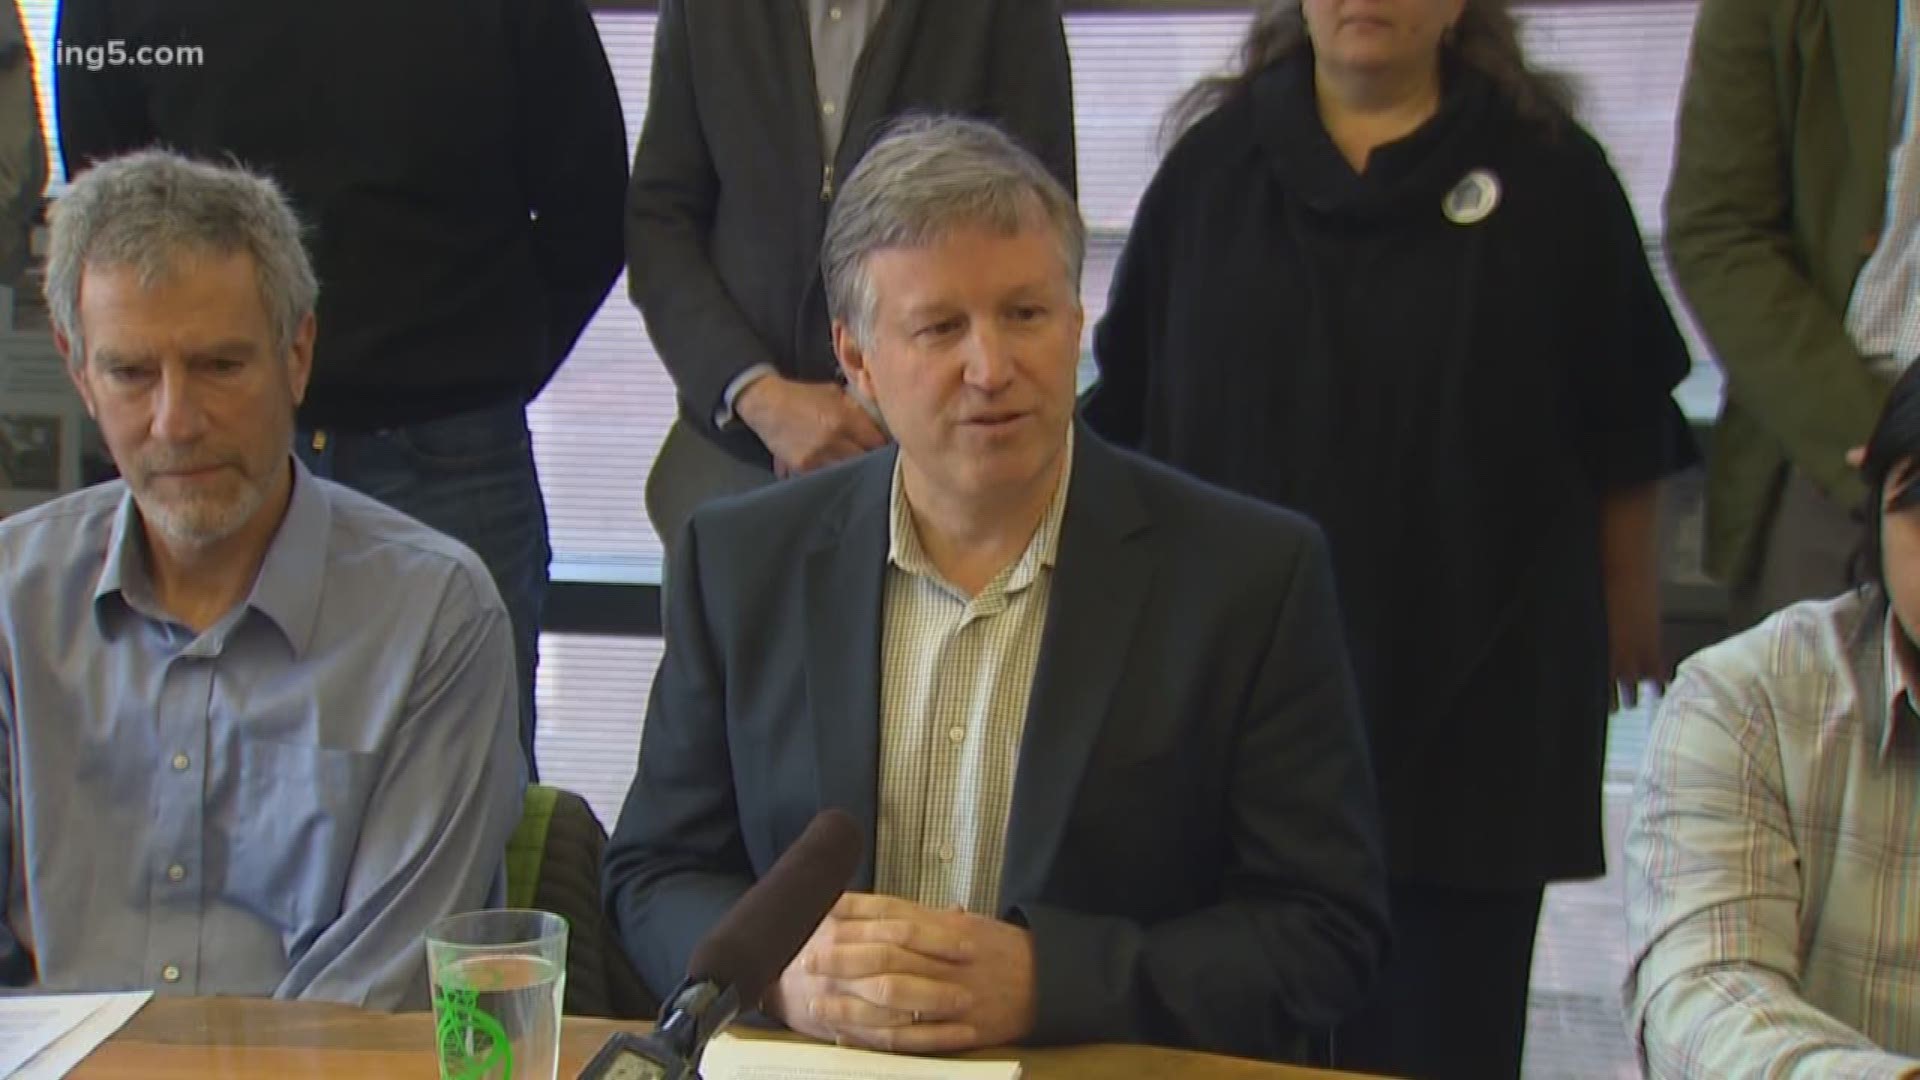 In the race for Seattle City Council, we have learned incumbent Mike O'Brien will not run for re-election. O'Brien has been in office since 2010 and had filed paperwork to fundraise. He told KING 5 it's time to allow new voices to help lead the city.